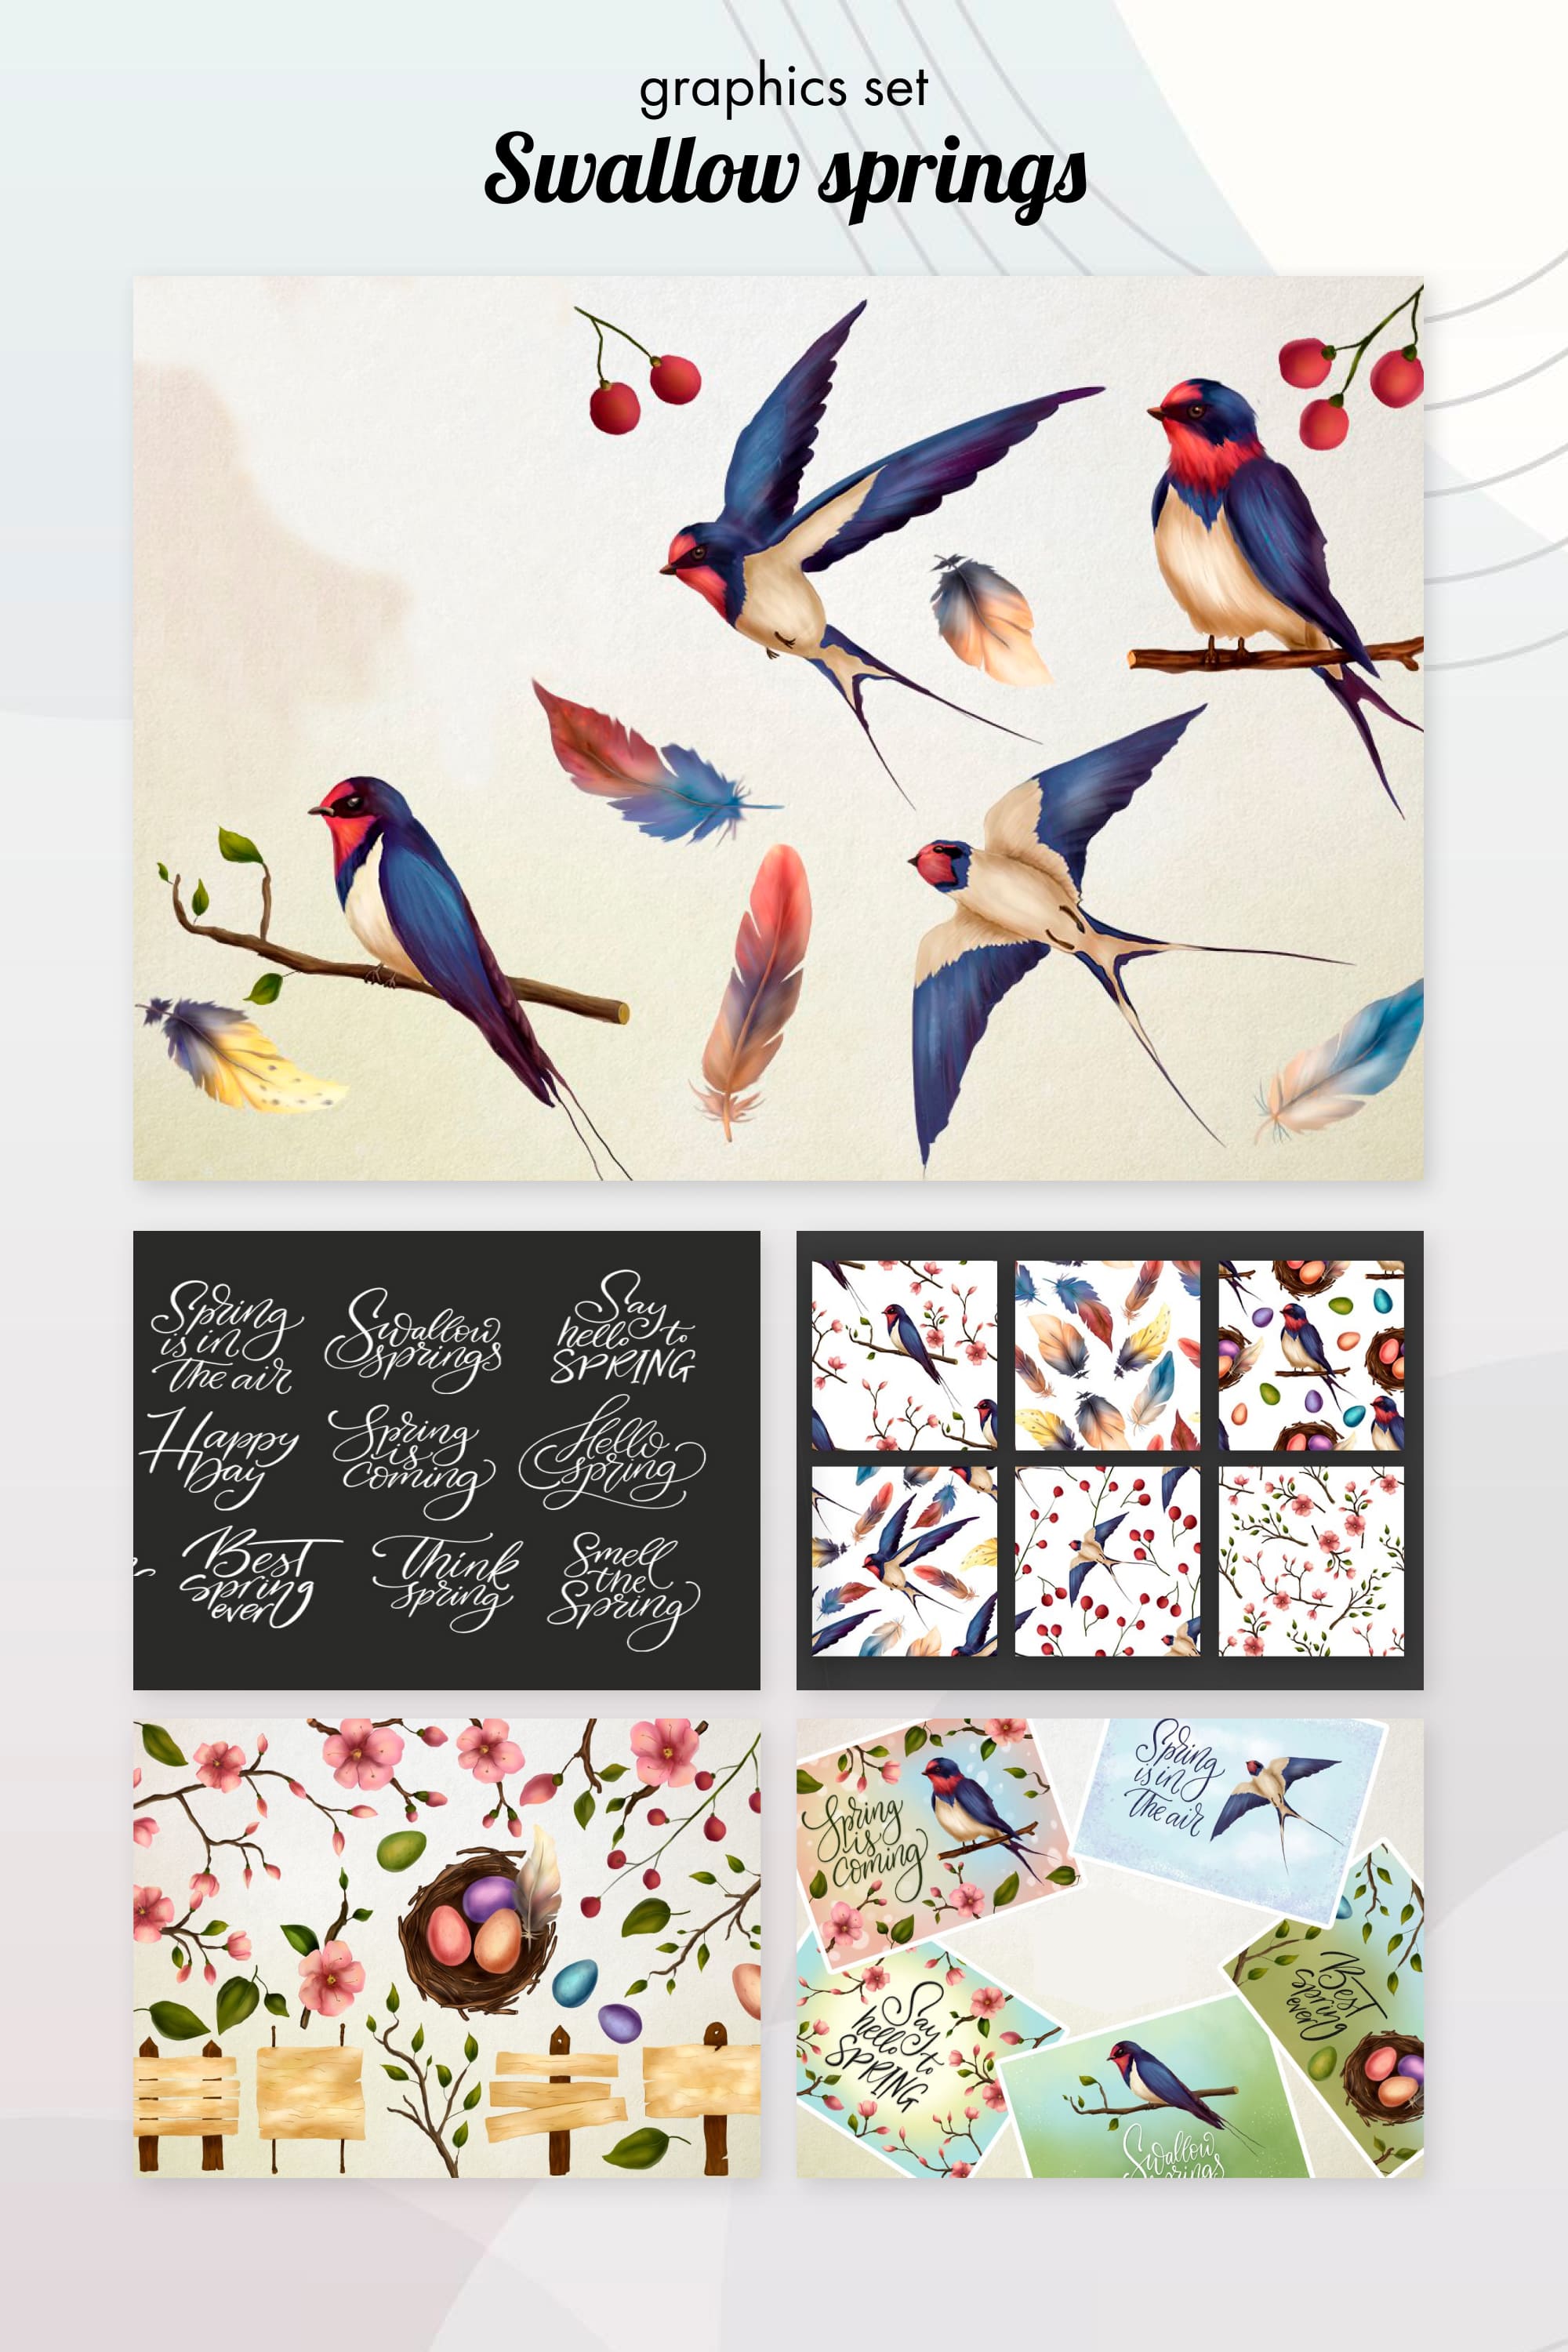 Swallow springs. Gentle graphics set - pinterest image preview.